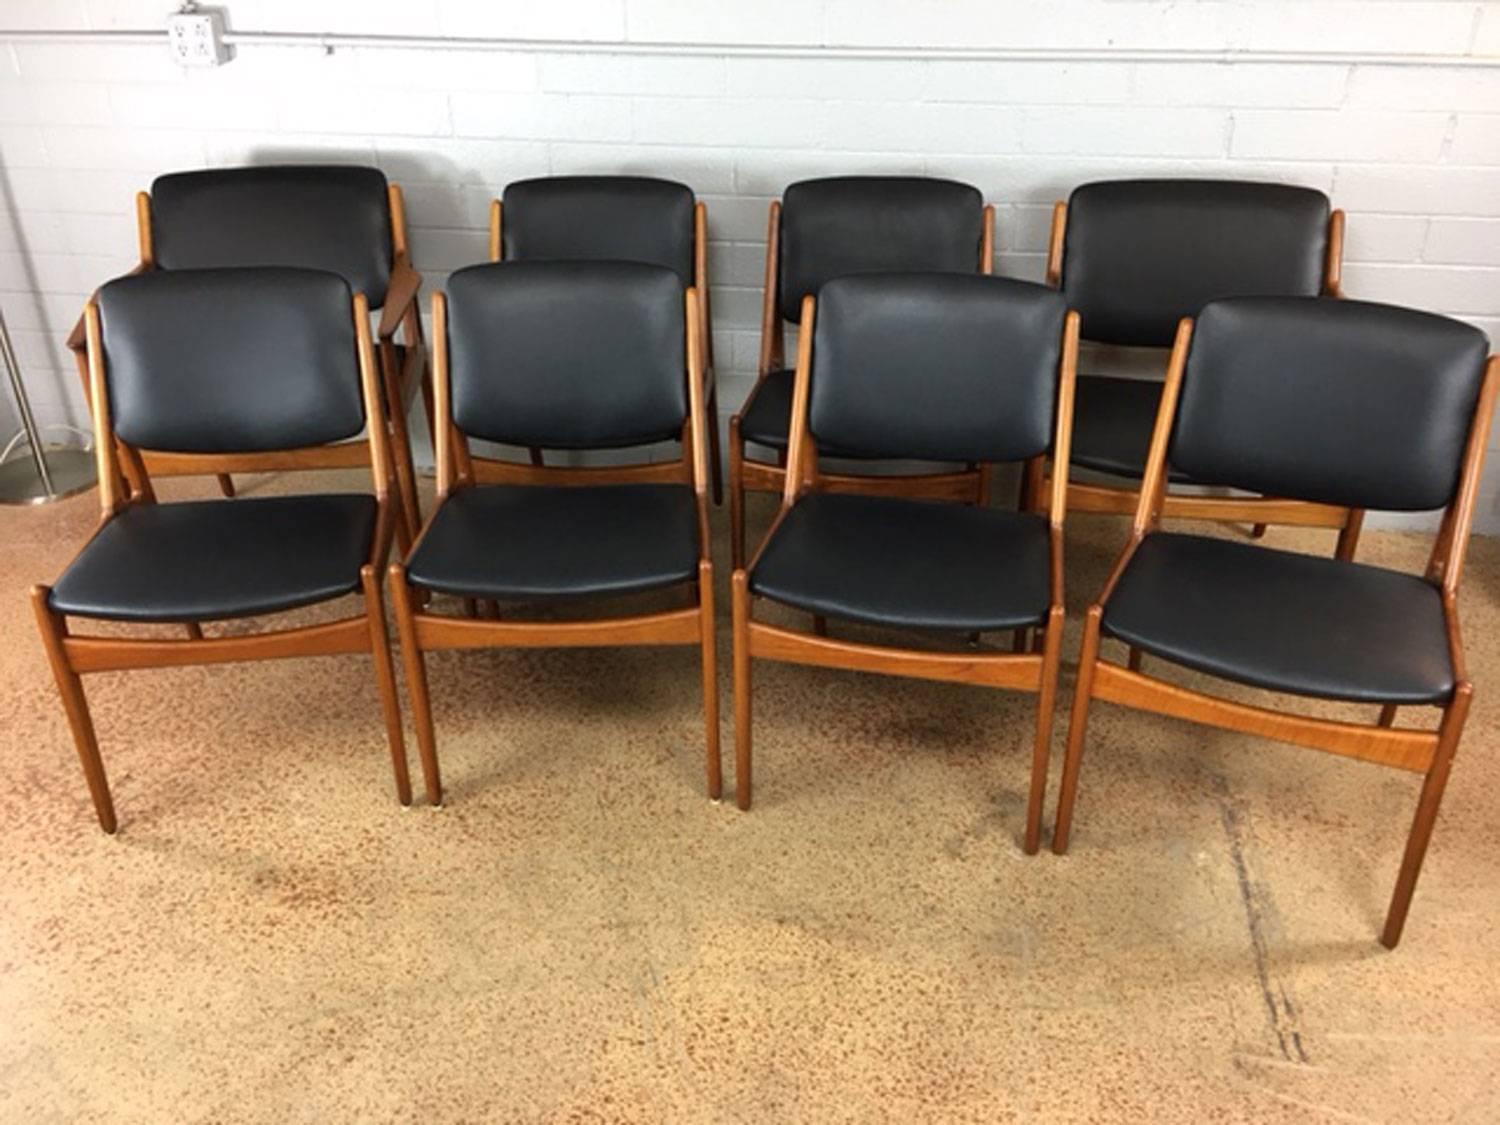 Set of eight Danish modern chairs with pivoting backs and teak frames designed by Arne Vodder. Tilt Back style. Each chair has new black leather. 

Manufactured by Vamo Sonderborg. 